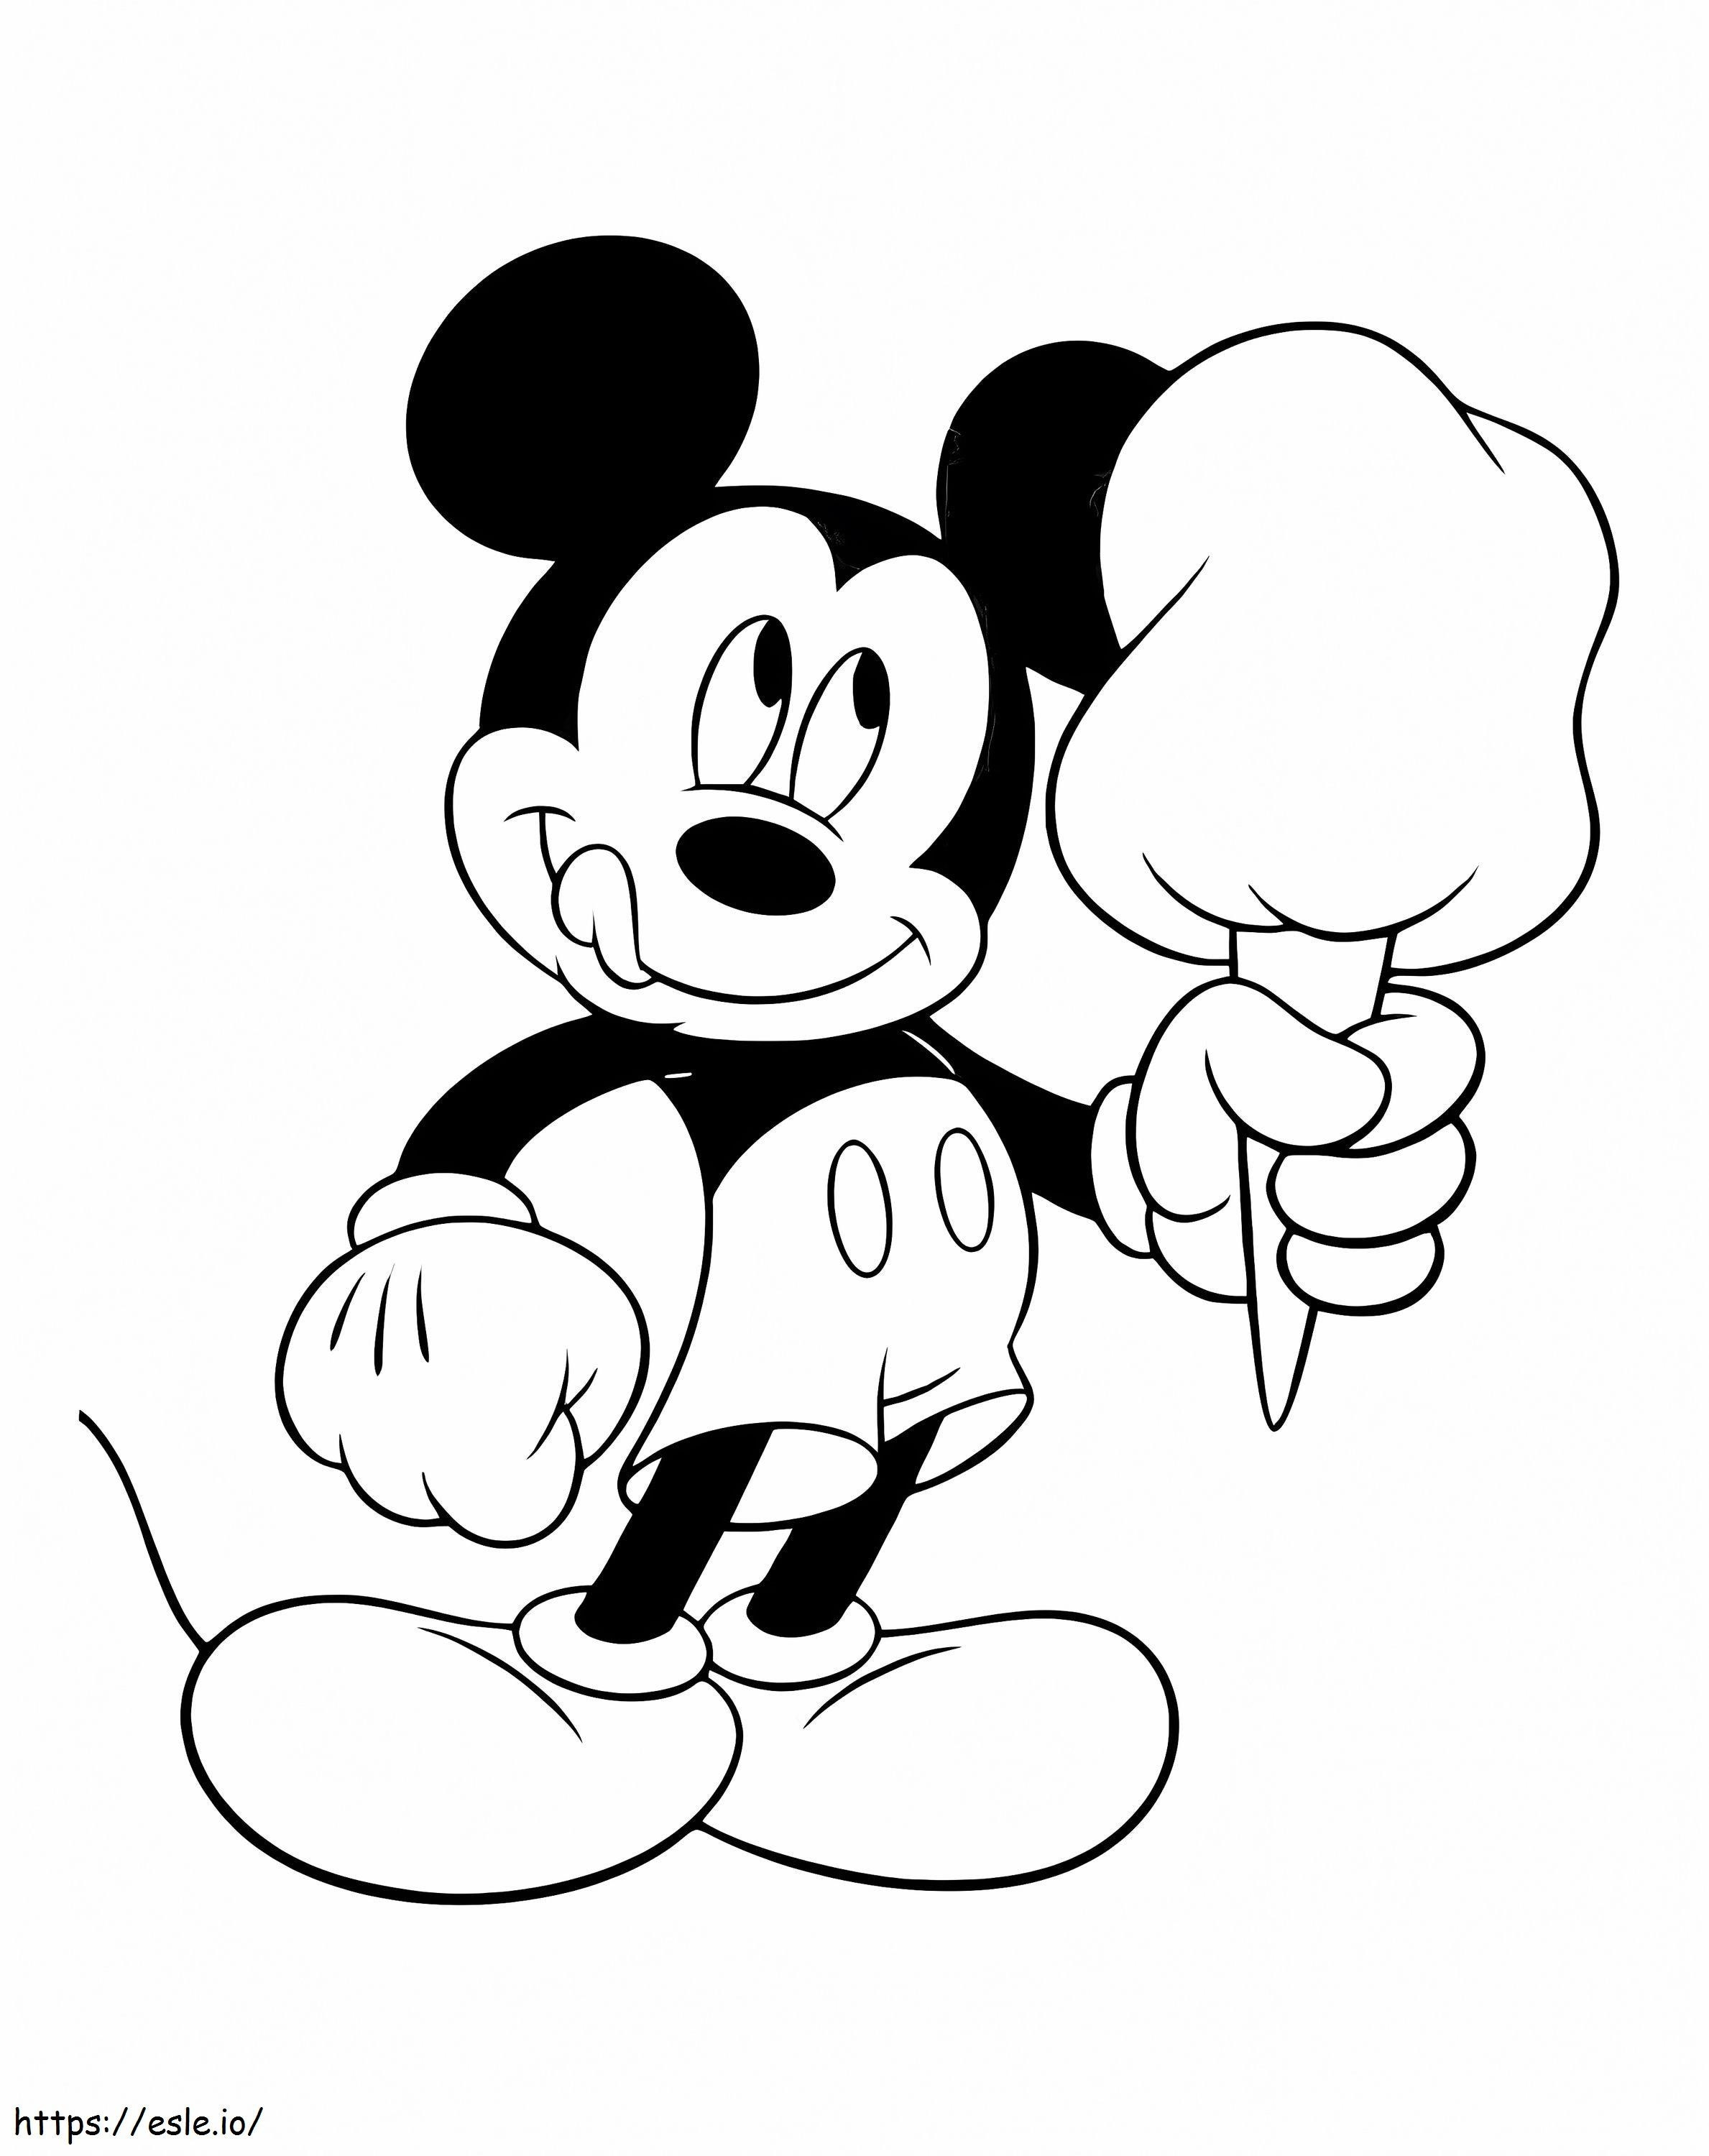 Mickey Mouse Holding Cotton Candy coloring page